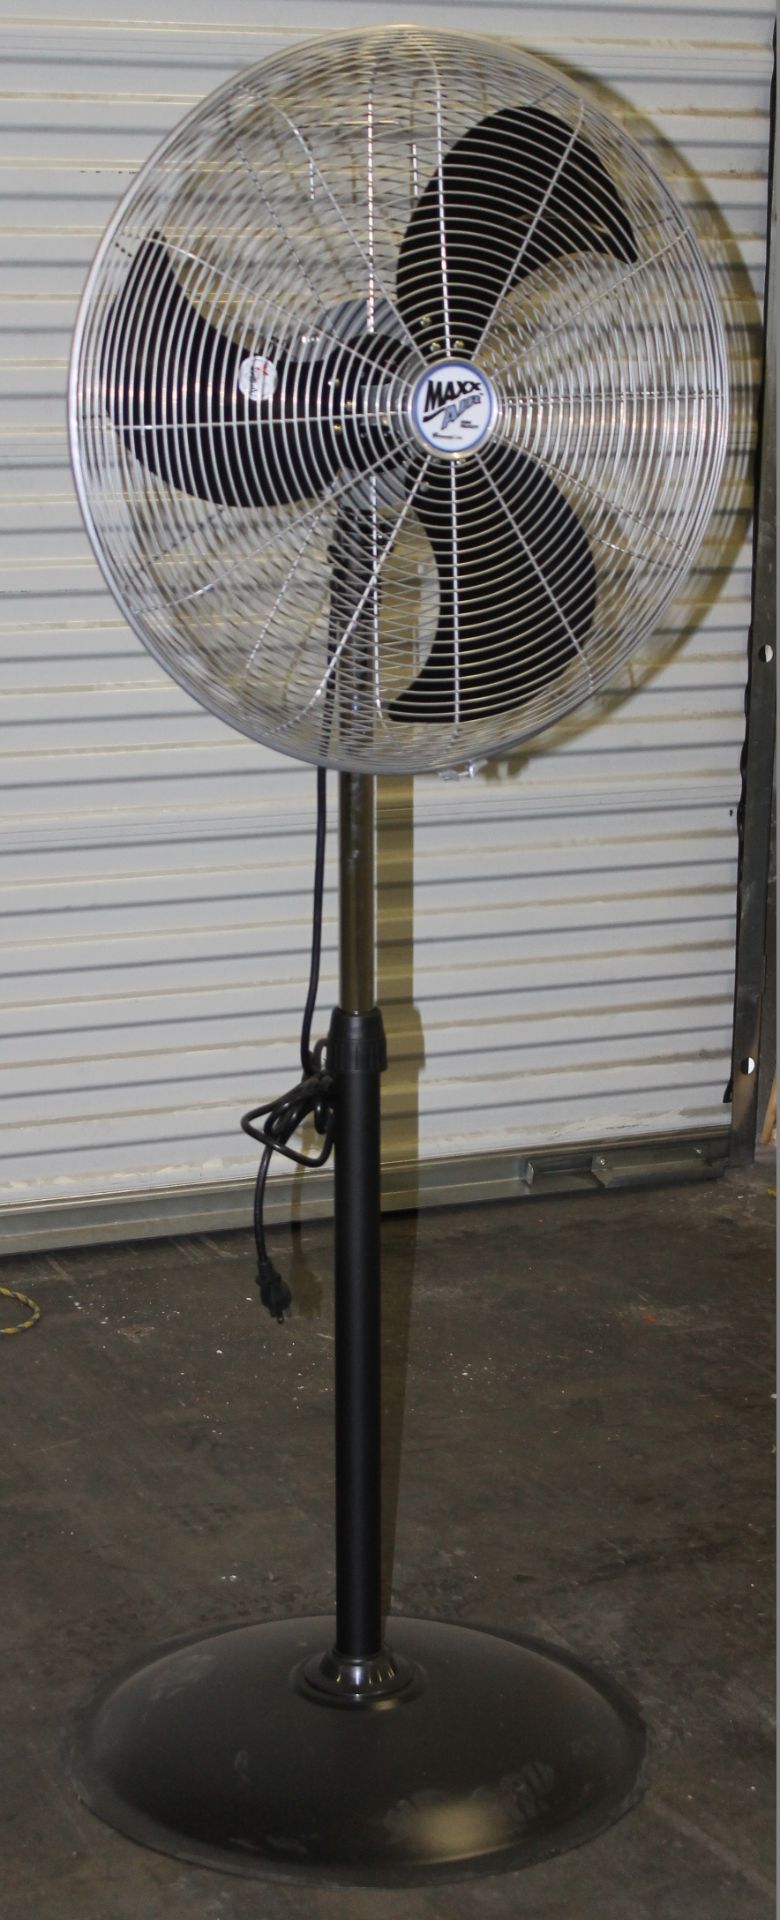 22" OSCILLATING PEDESTAL FAN,  HEAVY DUTY 3-SPEED THERMALLY PROTECTED MOTOR, - Image 2 of 2